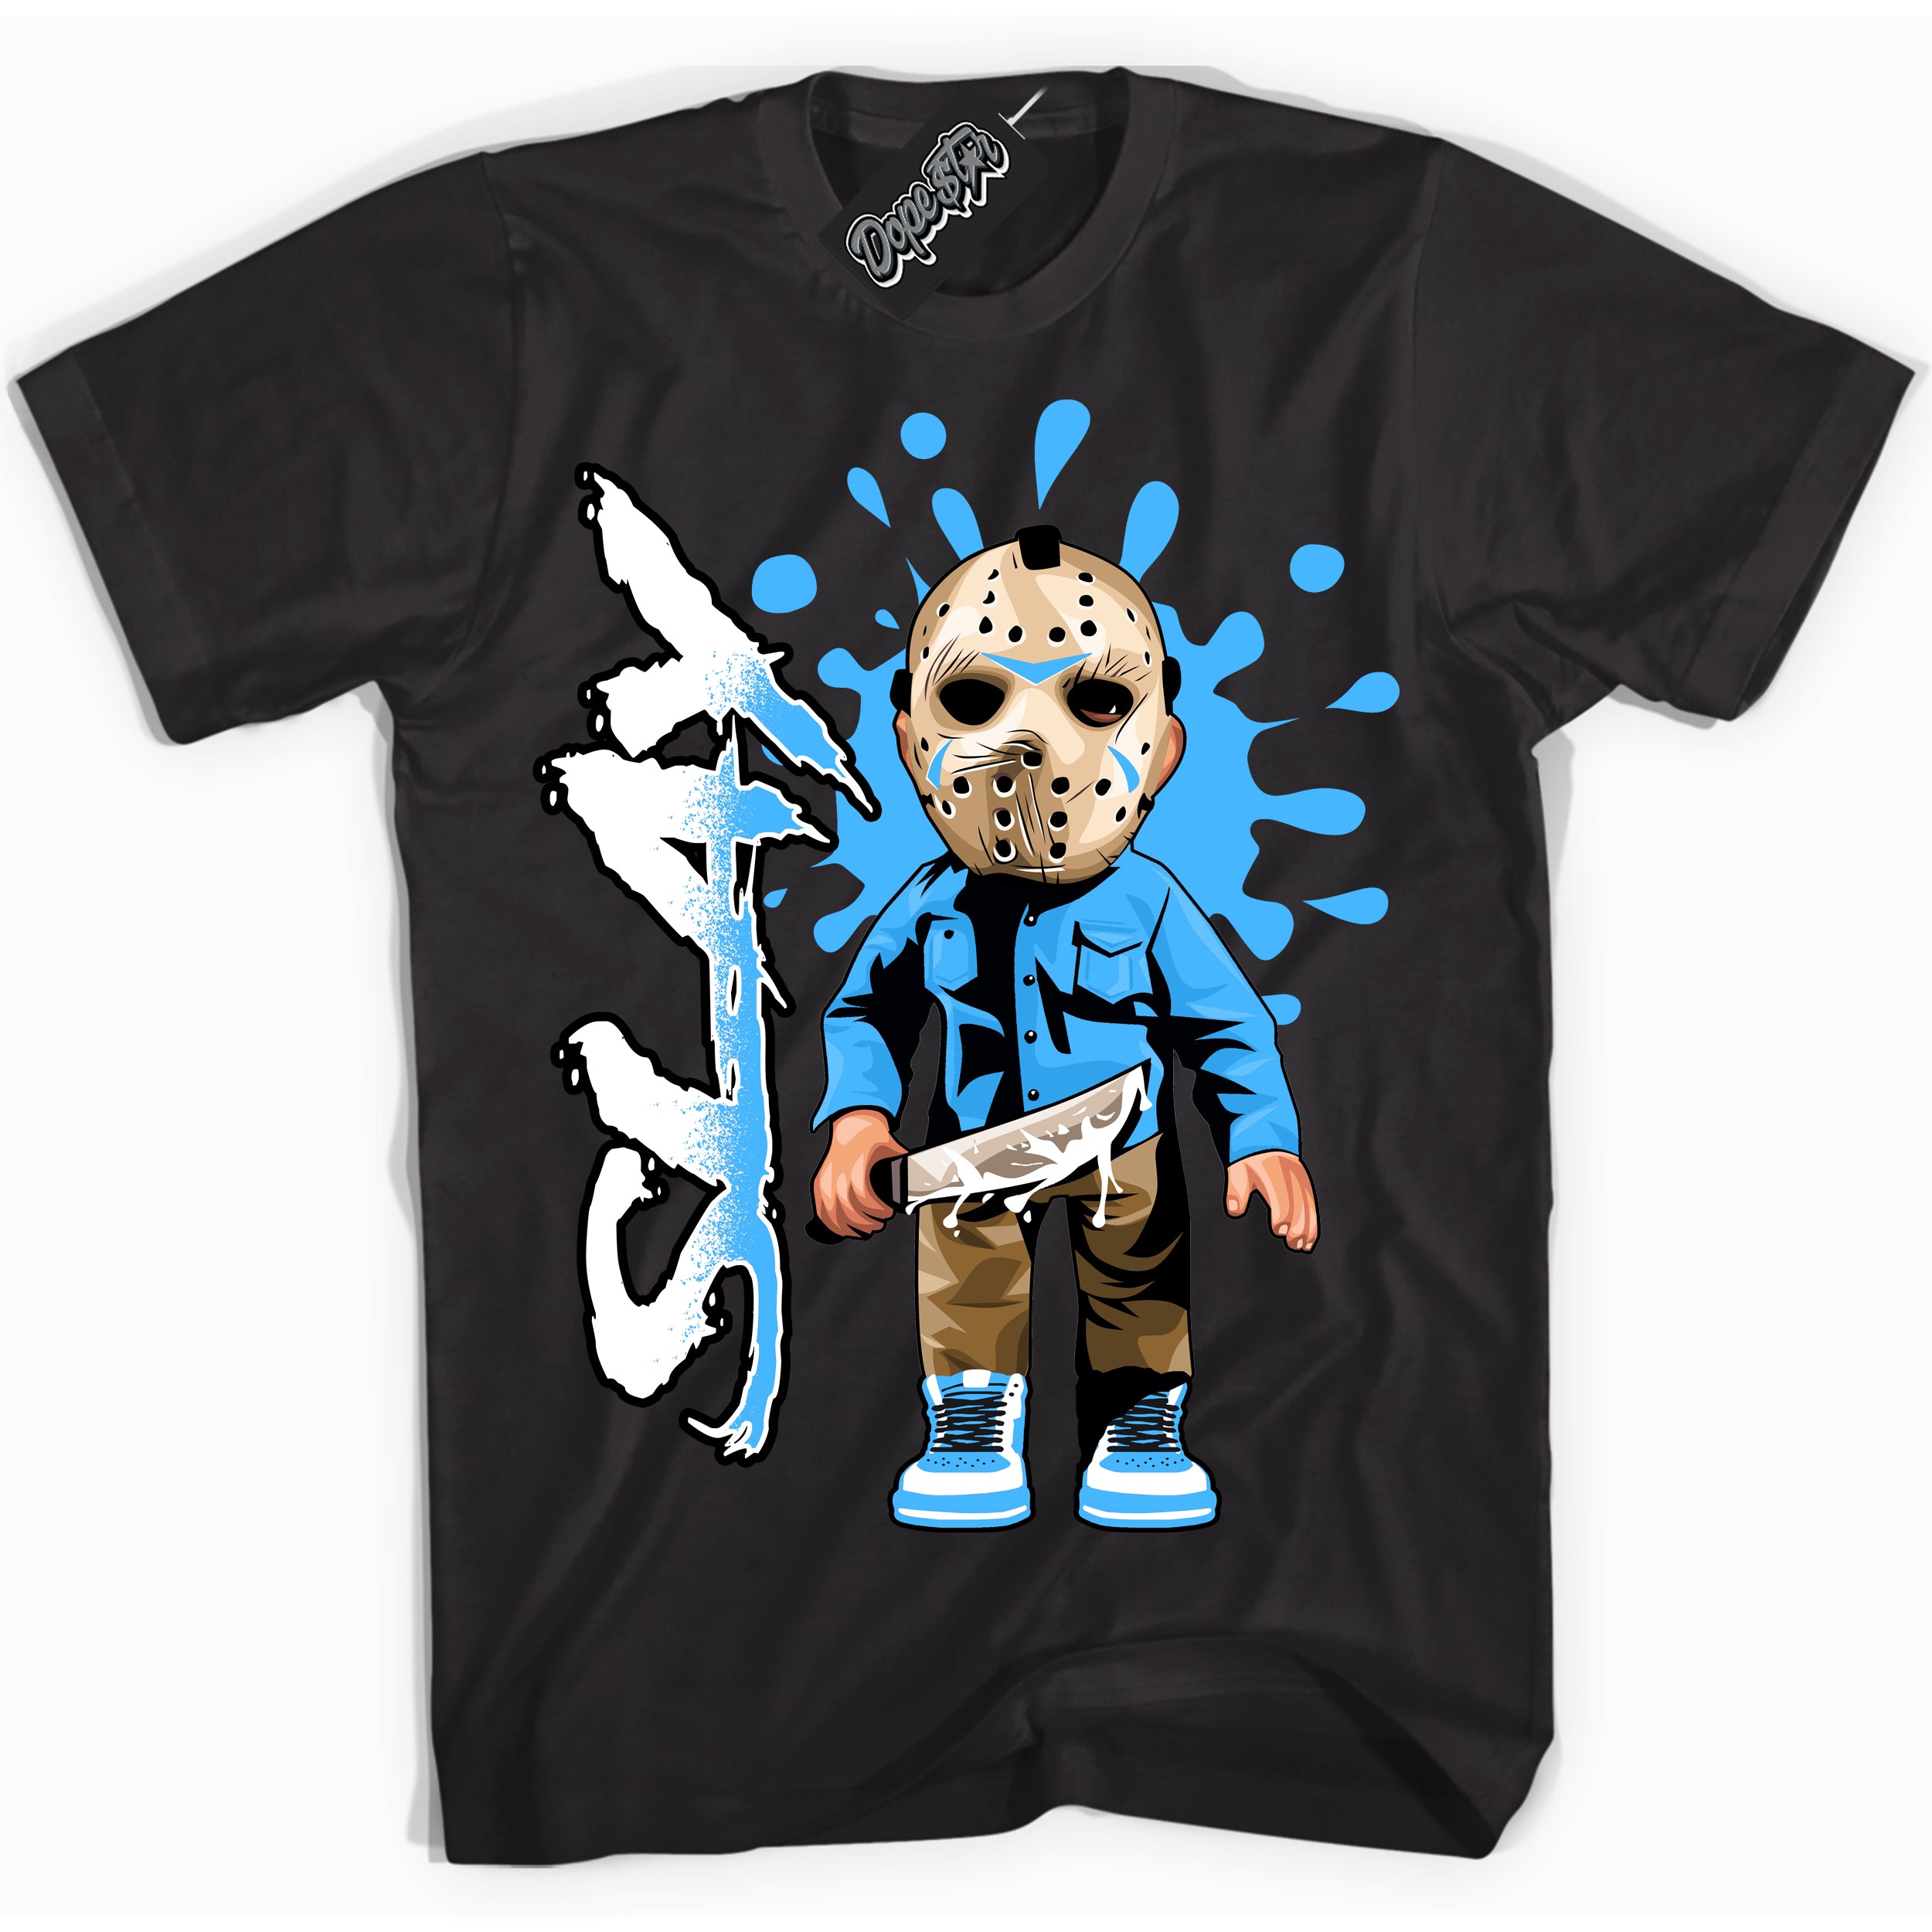 Cool Black graphic tee with “ Slay ” design, that perfectly matches Powder Blue 9s sneakers 